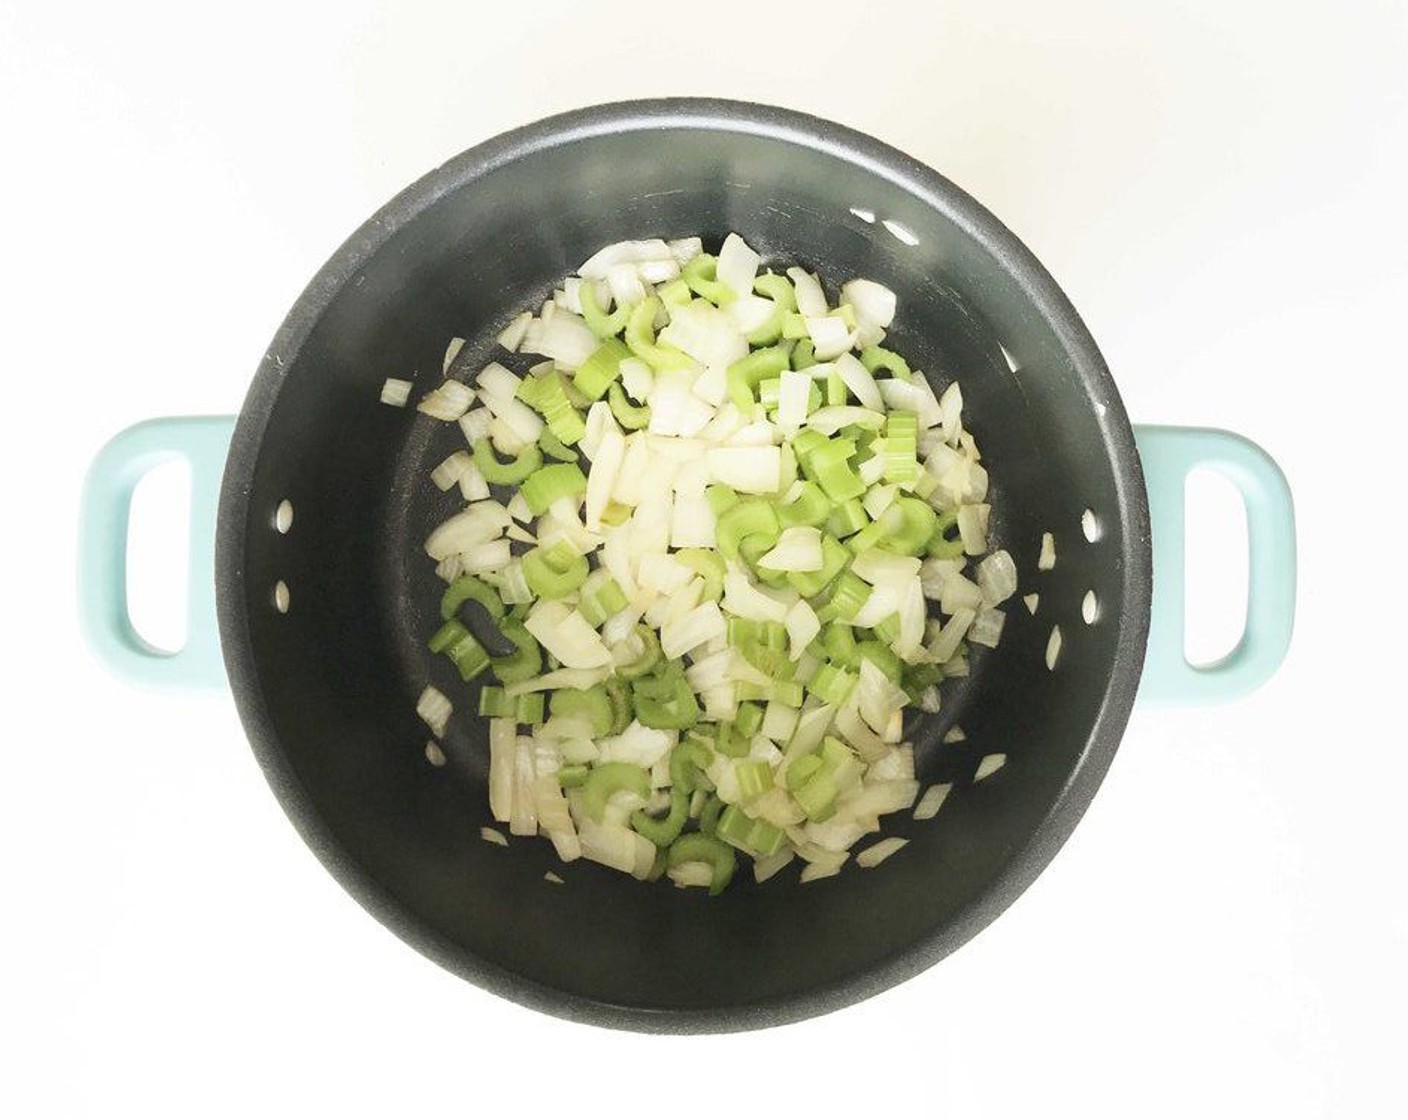 step 1 Place Celery (2 stalks), Onion (1/2), and Garlic (2 cloves) into the bottom of a stockpot. Heat over medium-high heat until the veggies are tender and the onions are becoming translucent.